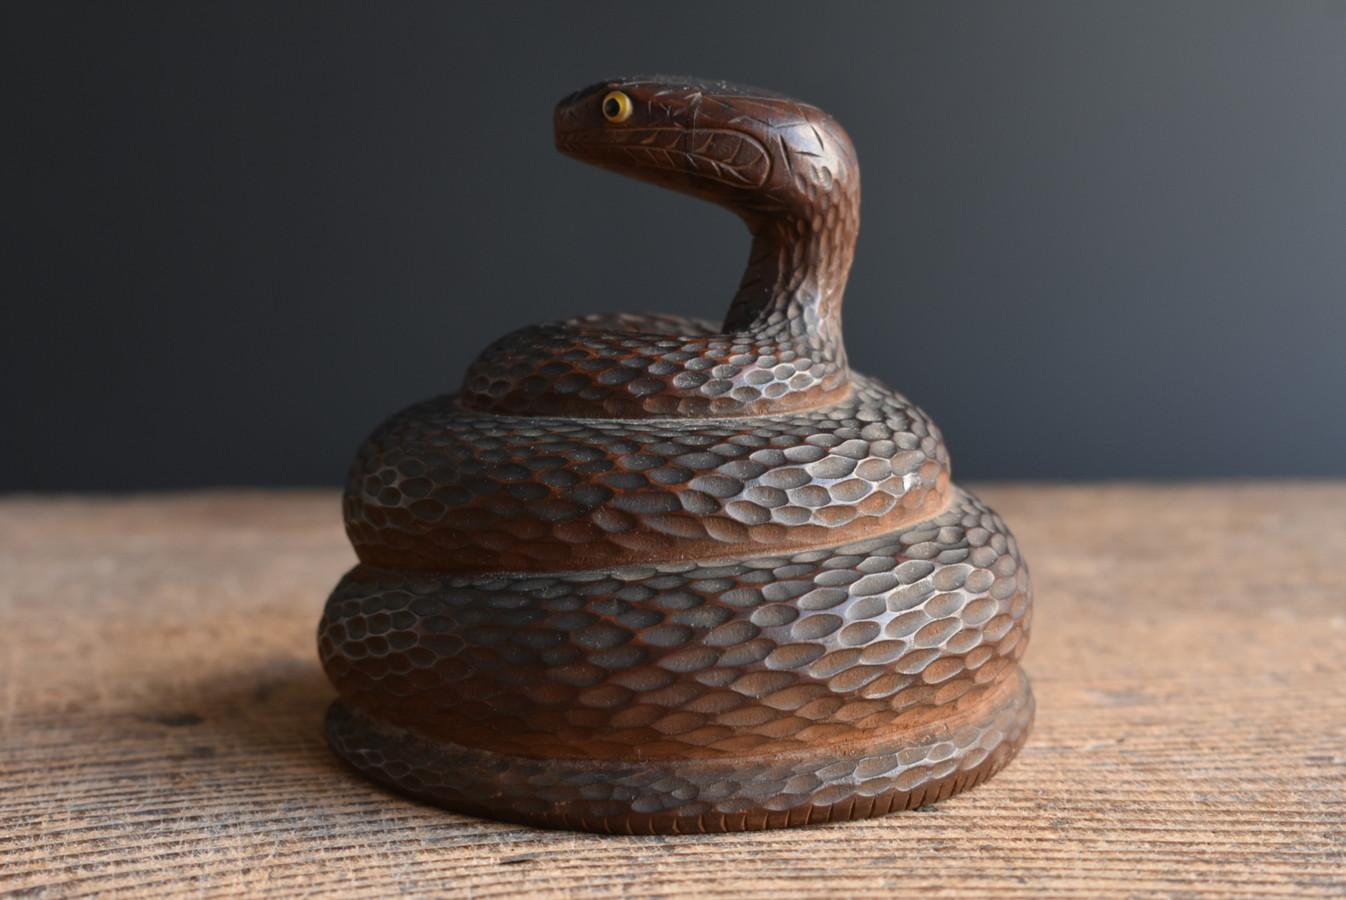 20th Century Japanese Old Wood Carved Small Snake Figurine / Taisho Period / Lucky Figurine